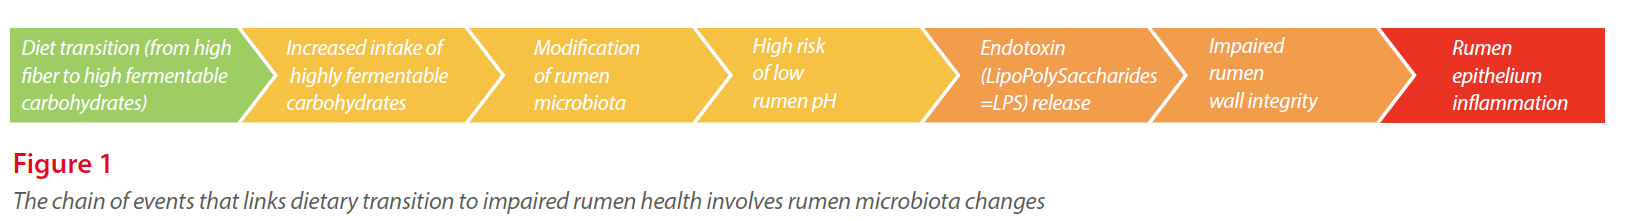 the chain of events that links dietary transition to impaired rumen health involves rumen microbiota changes